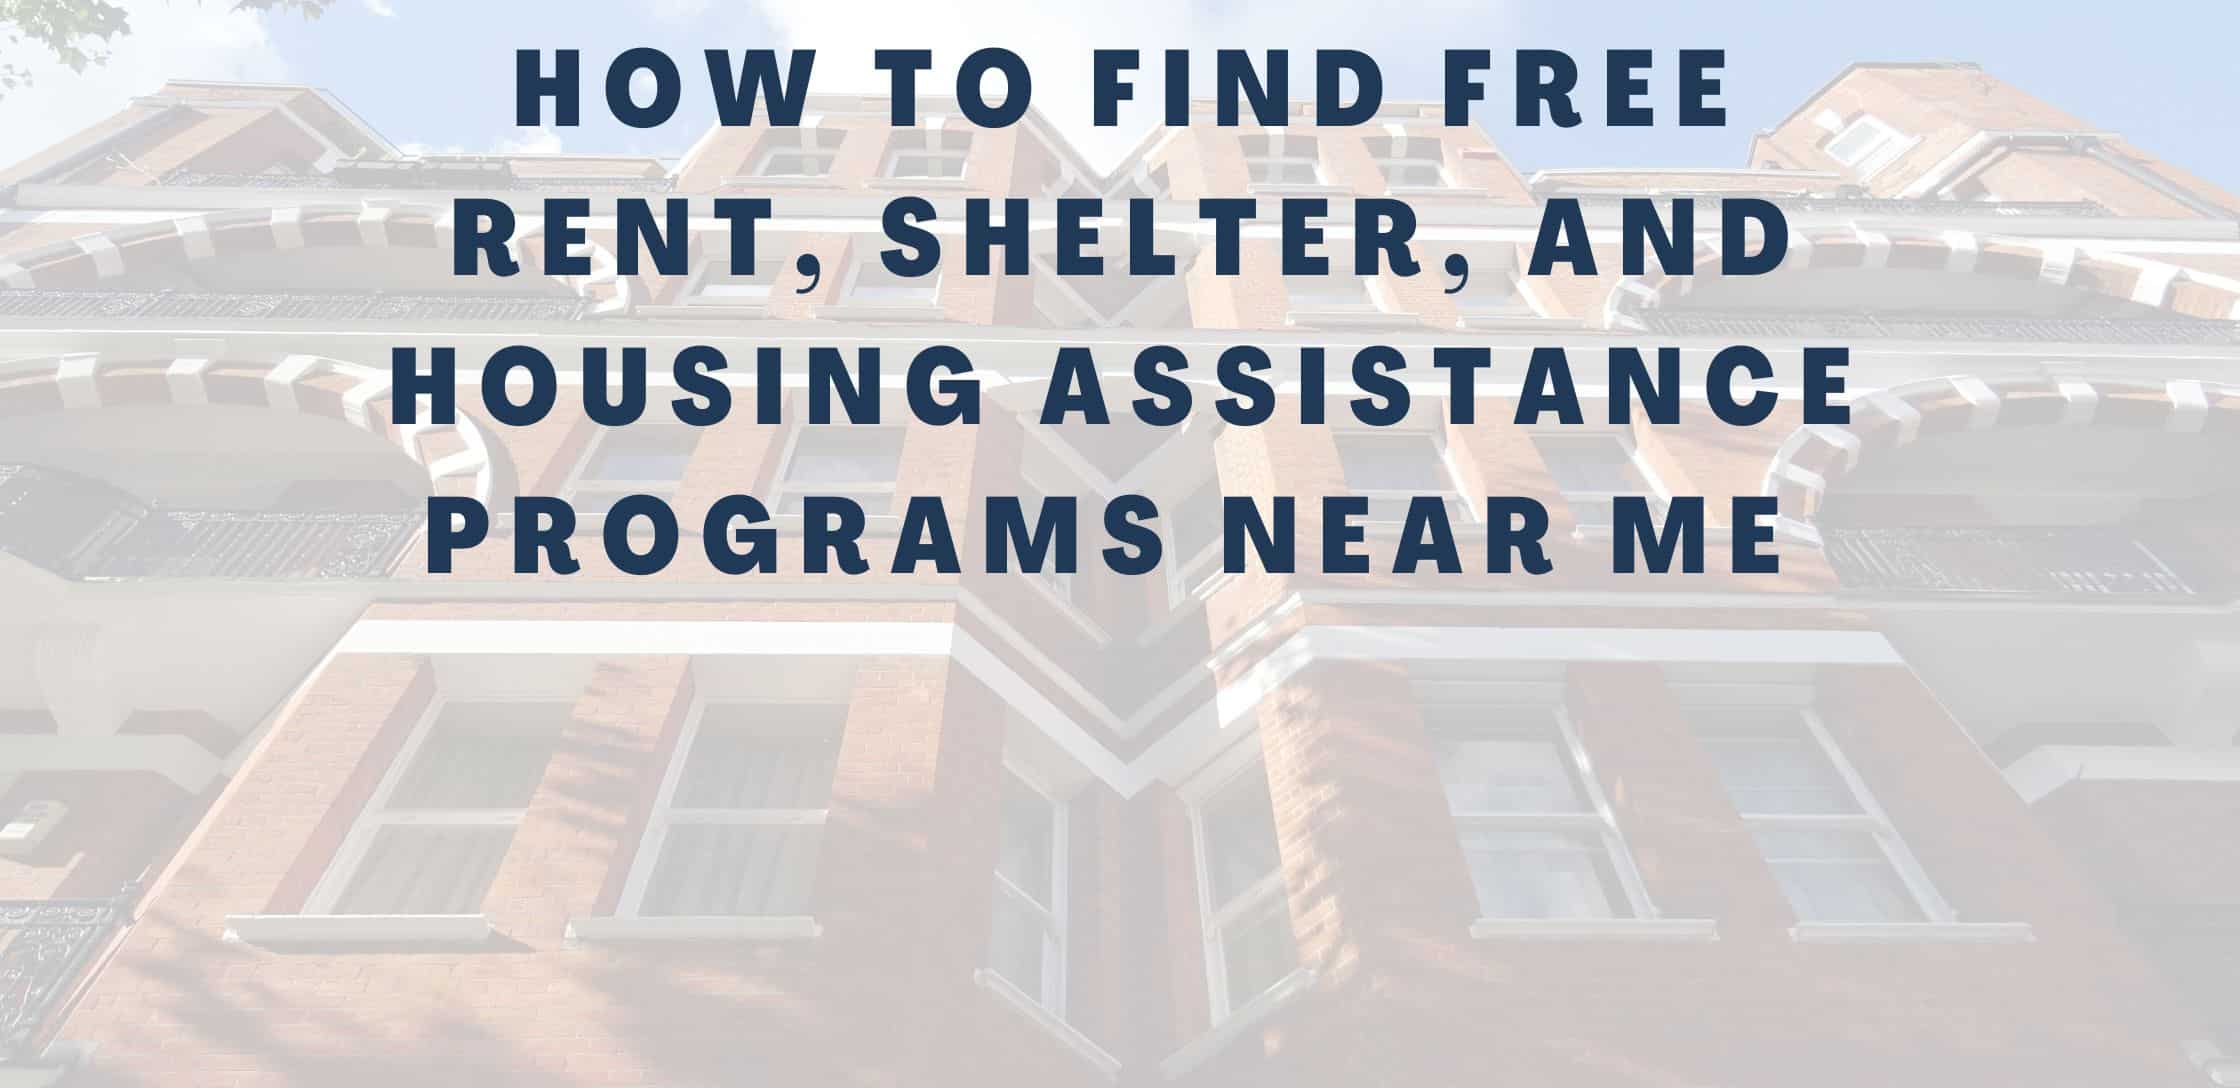 How To Find Free Rent Shelter And Housing Assistance Programs Near Me  